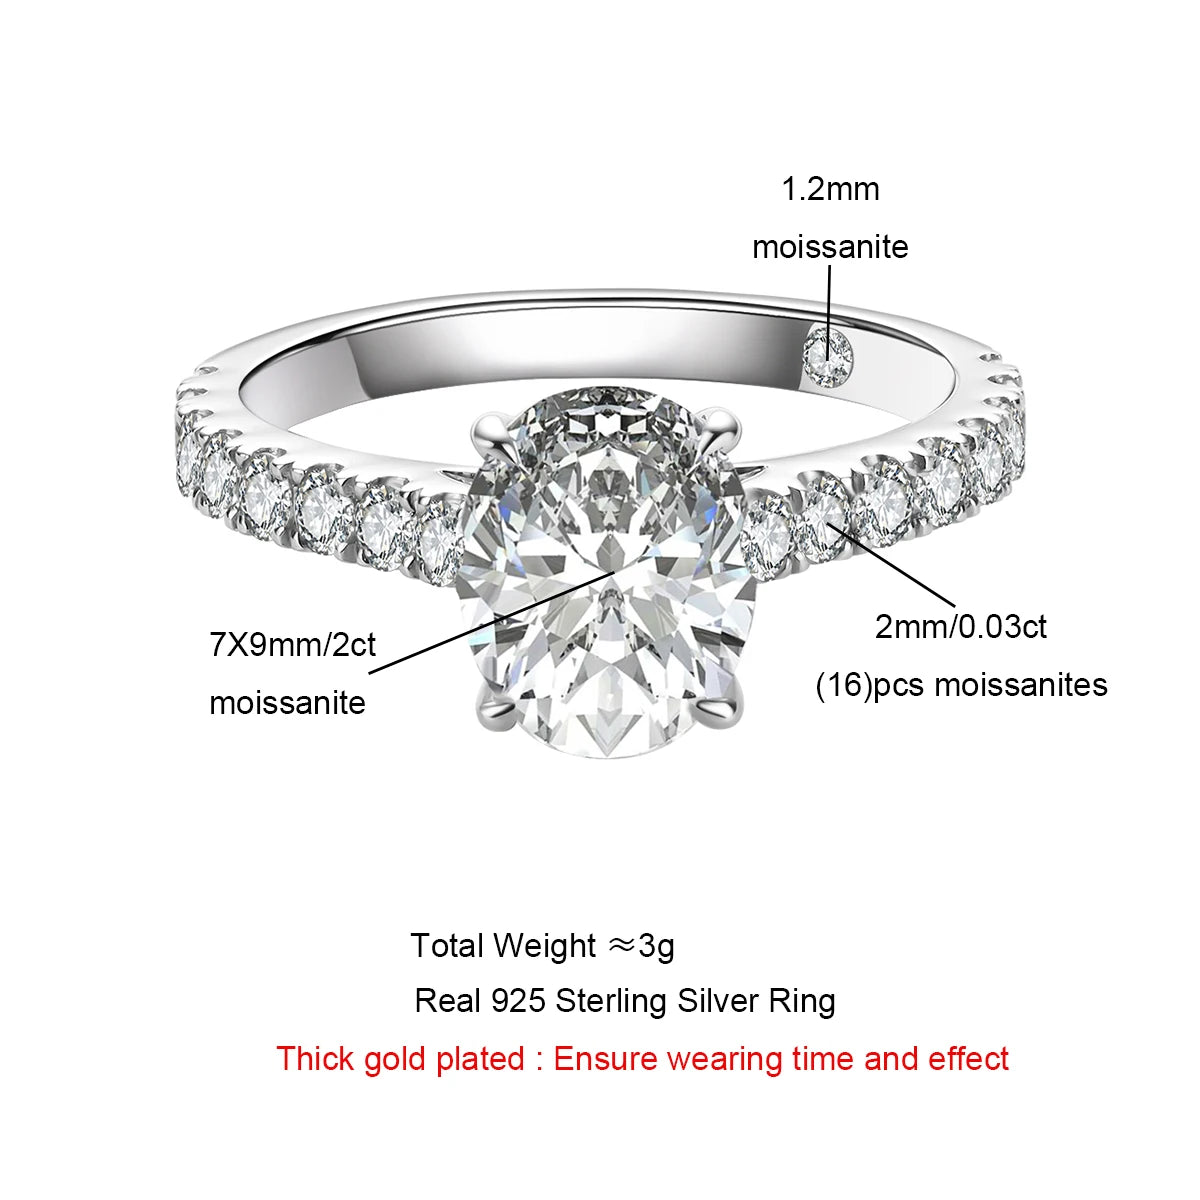 Stunning Moissanite Engagement Rings for Your Special Day